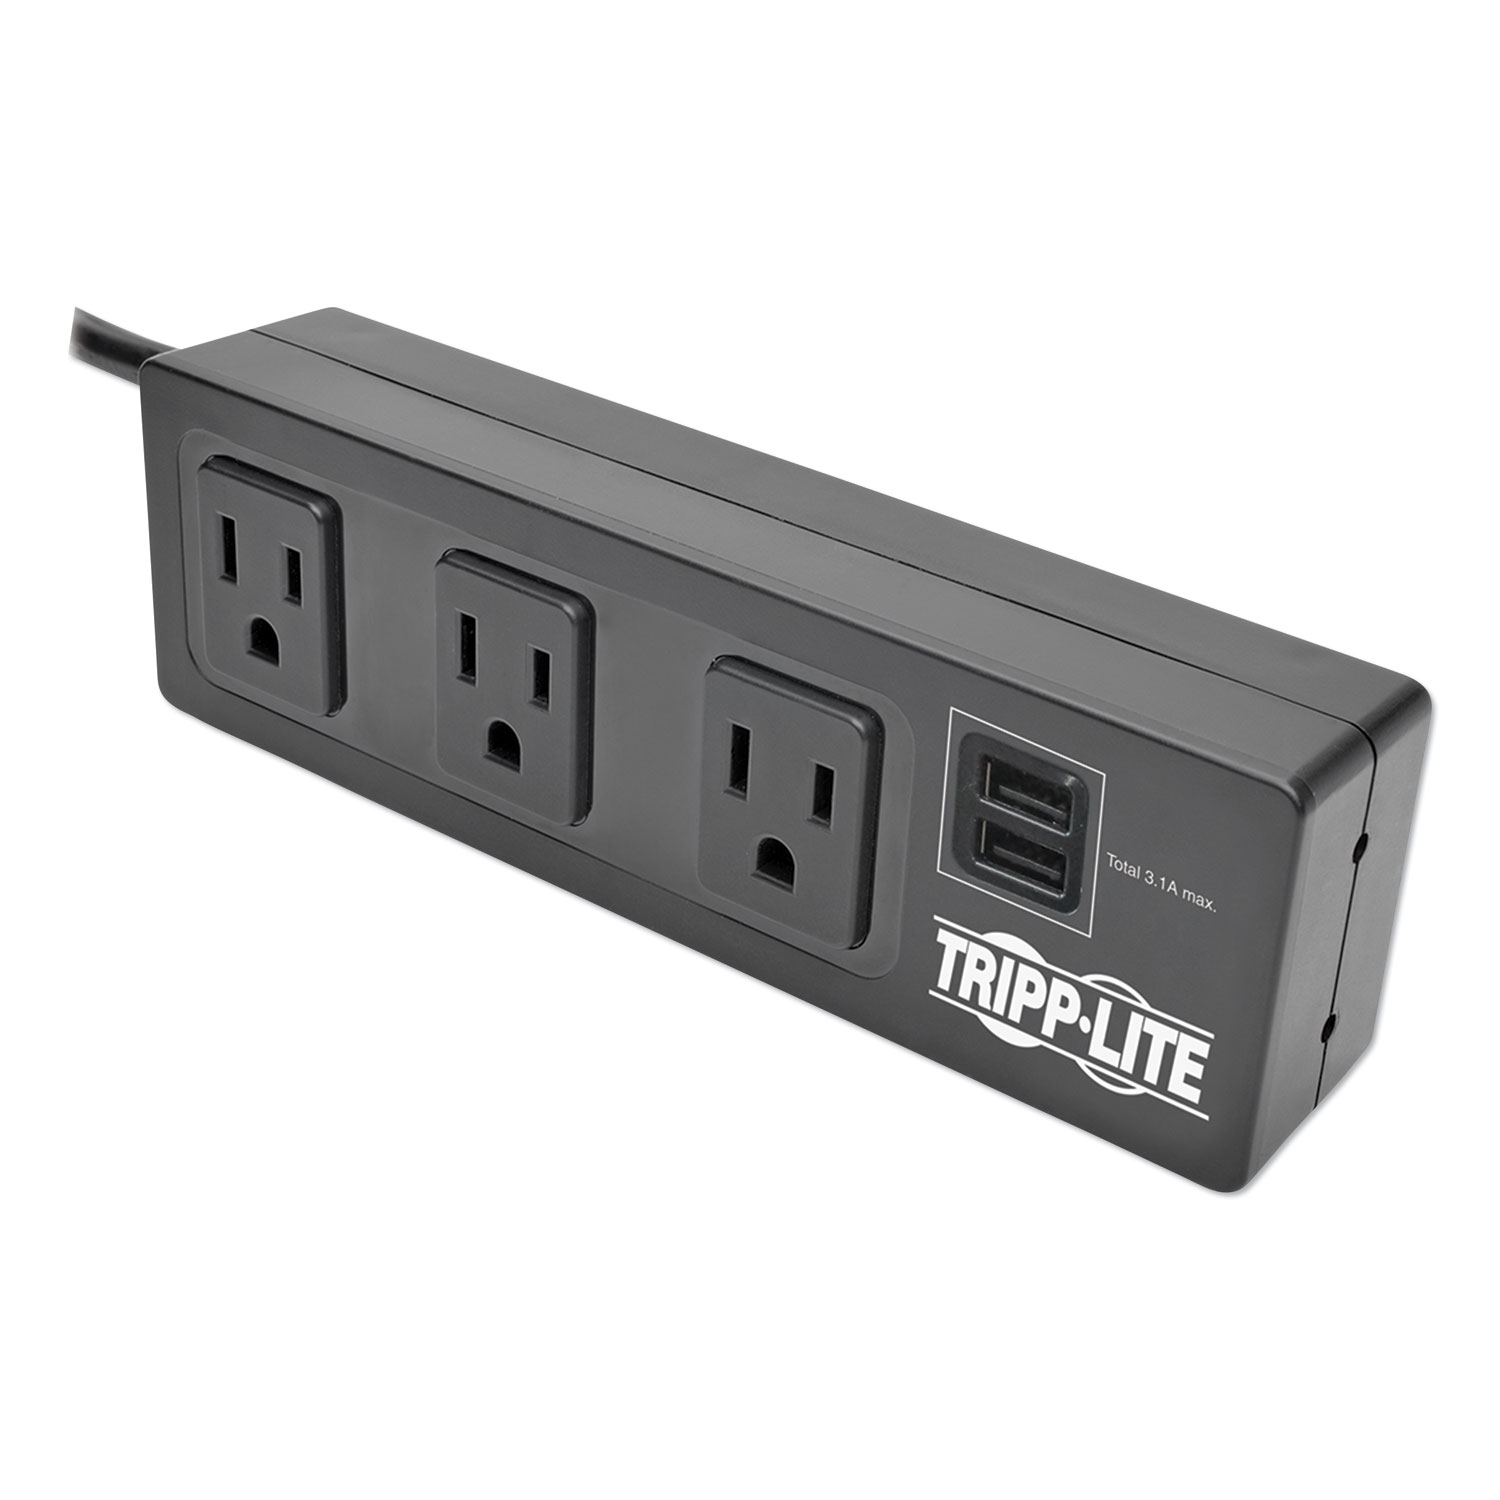  Tripp Lite TLP310USBS Protect It! 3-Outlet Surge Protector with Mounting Brackets, 10 ft Cord, 510 Joules, Black (TRPTLP310USBS) 